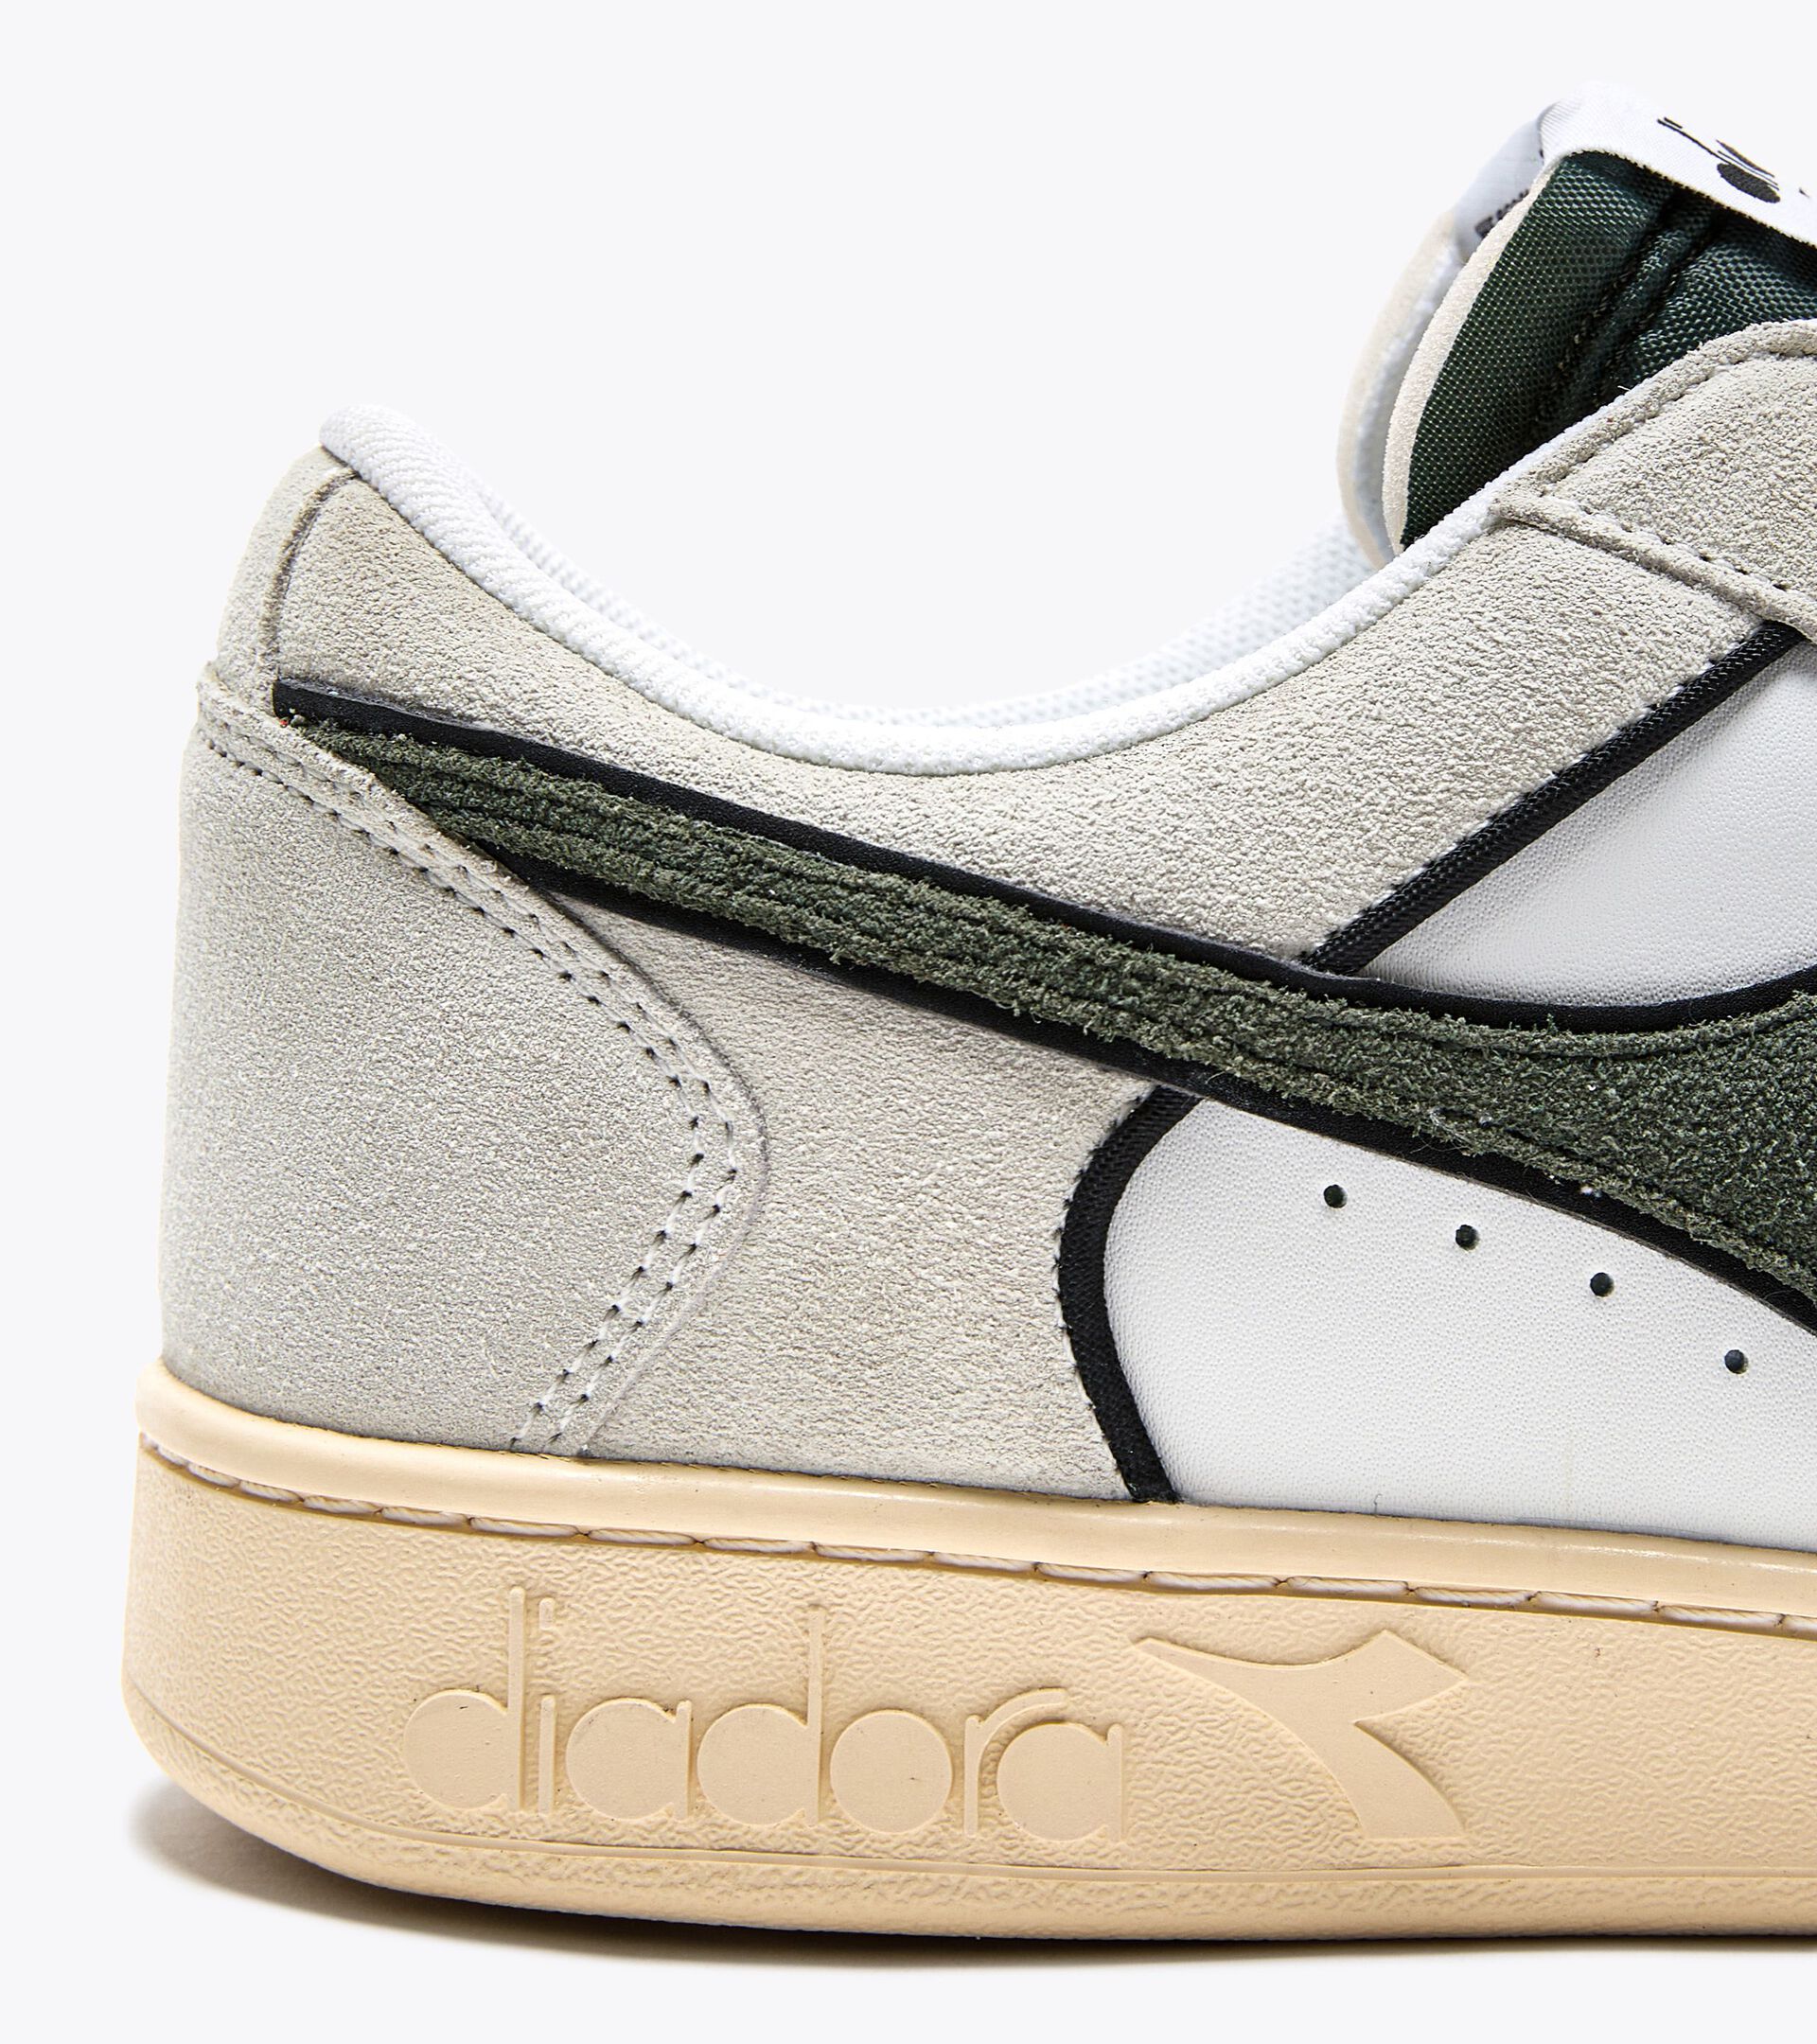 Sporty sneakers - Gender neutral MAGIC BASKET LOW SUEDE LEATHER WHITE/DARK FOREST - Diadora